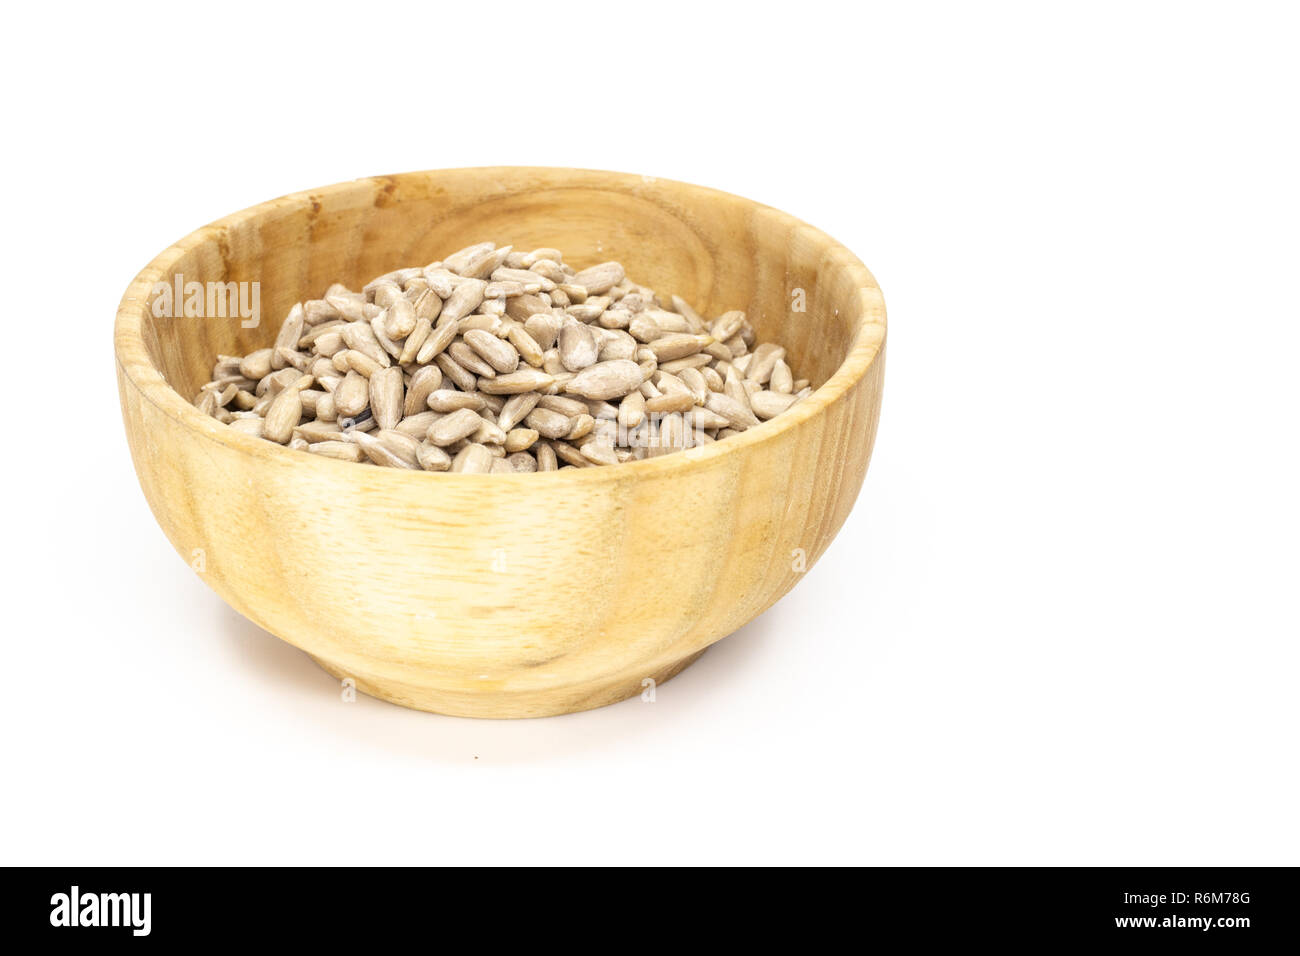 Sunflower seed dehulled kernel (Helianthus annuus) in wooden saucer, isolated on white Stock Photo